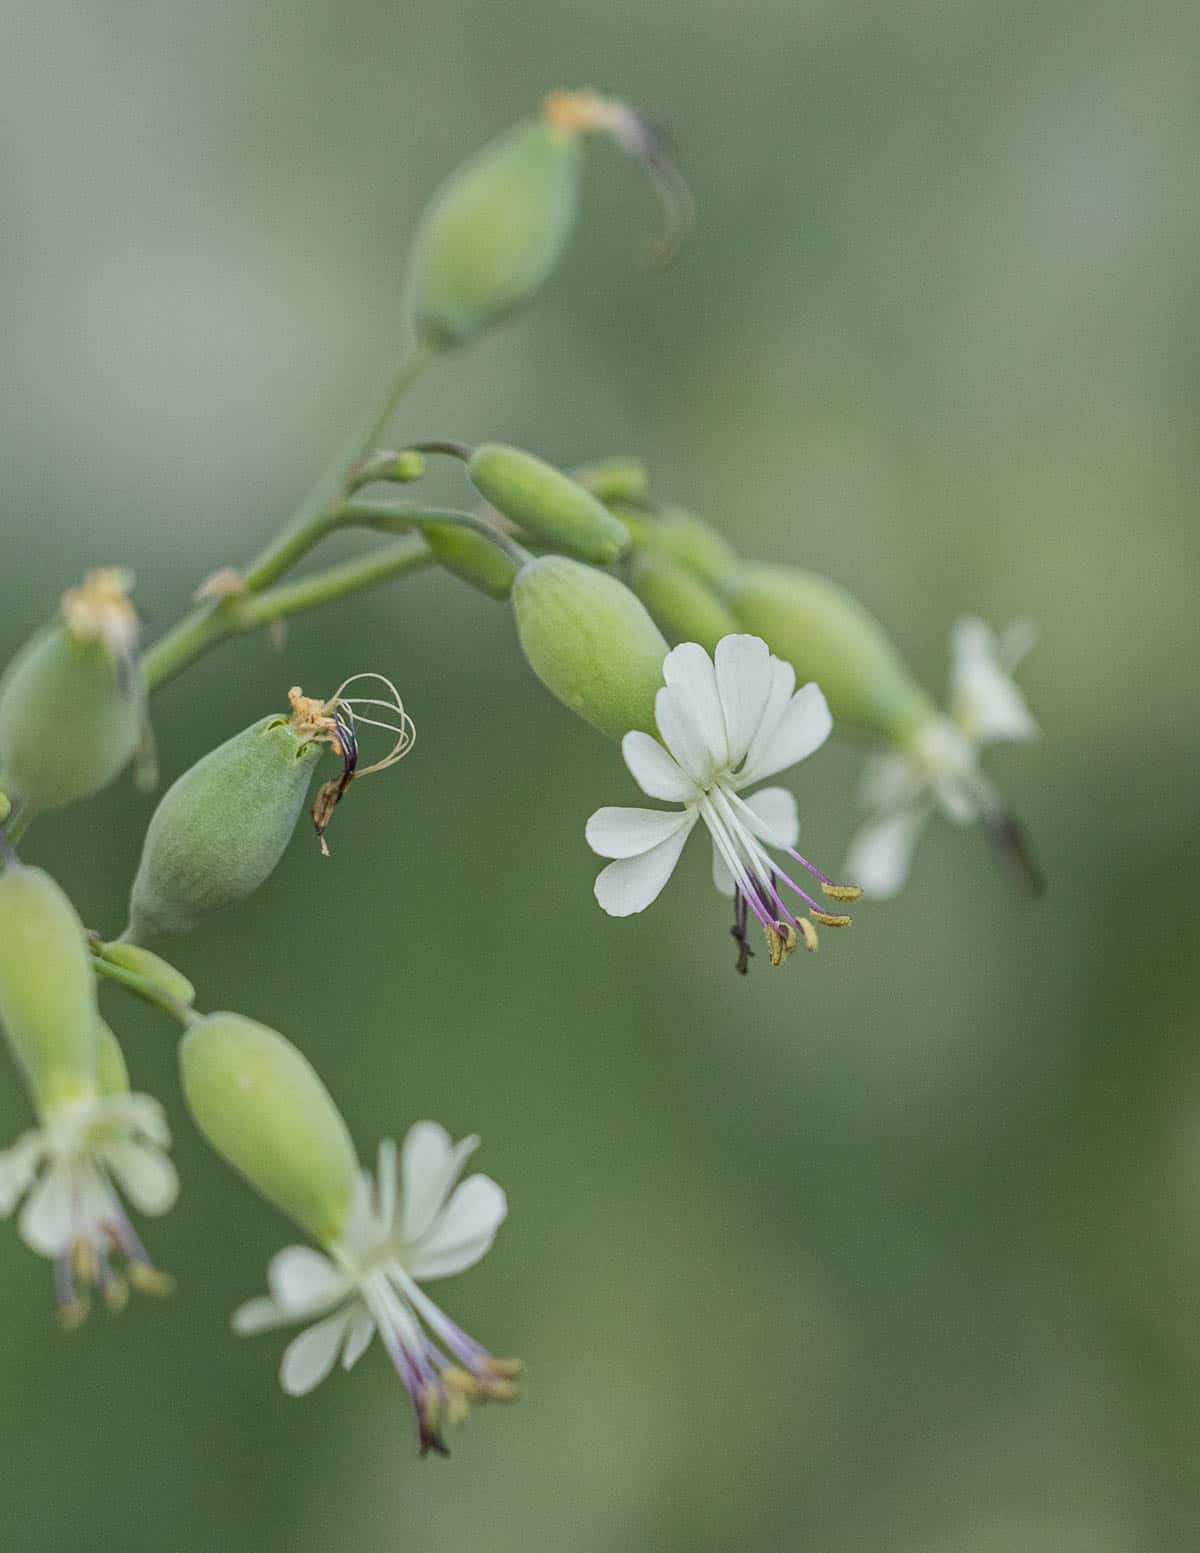 A close up image of bladder campion flowers. 